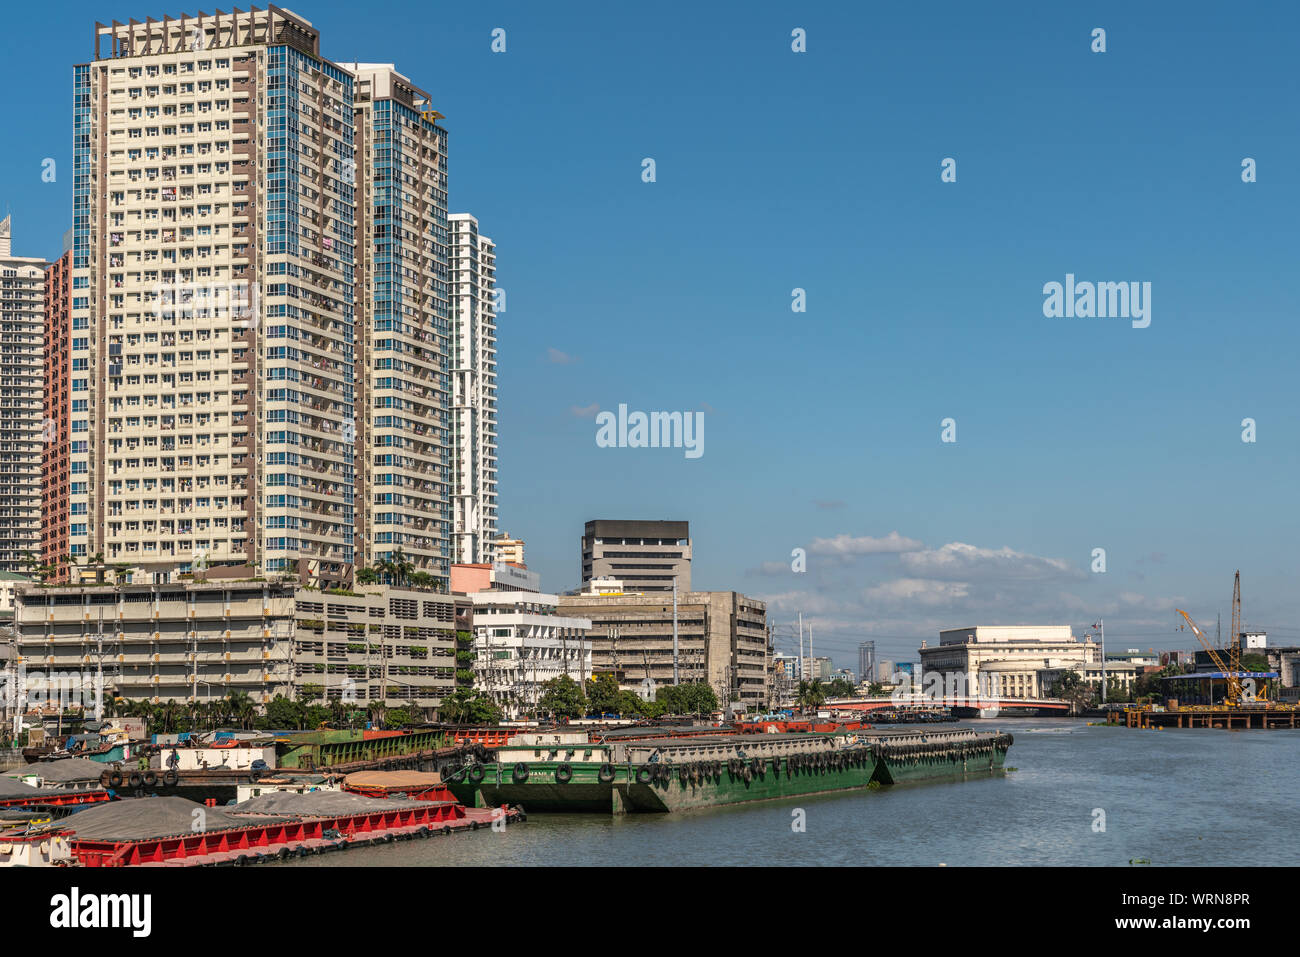 Manila, Philippines - March 5, 2019: Outside Fort Santiago. Barges and skyscrapers apartment buildings along Pasig River under blue sky. Central Posta Stock Photo